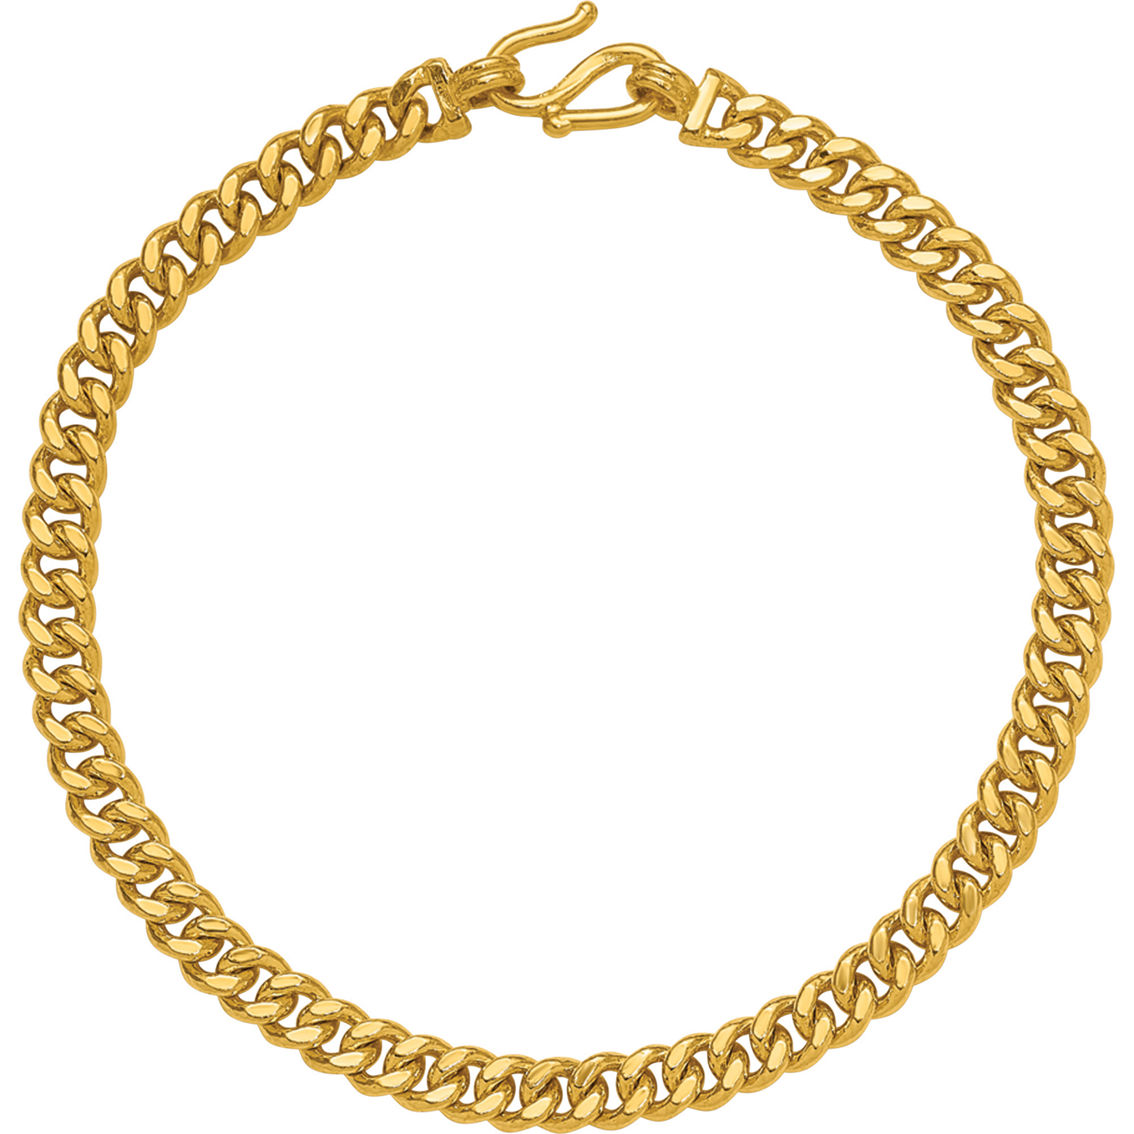 24K Pure Gold 5mm Solid Curb Chain 7.5 in. Bracelet - Image 2 of 5